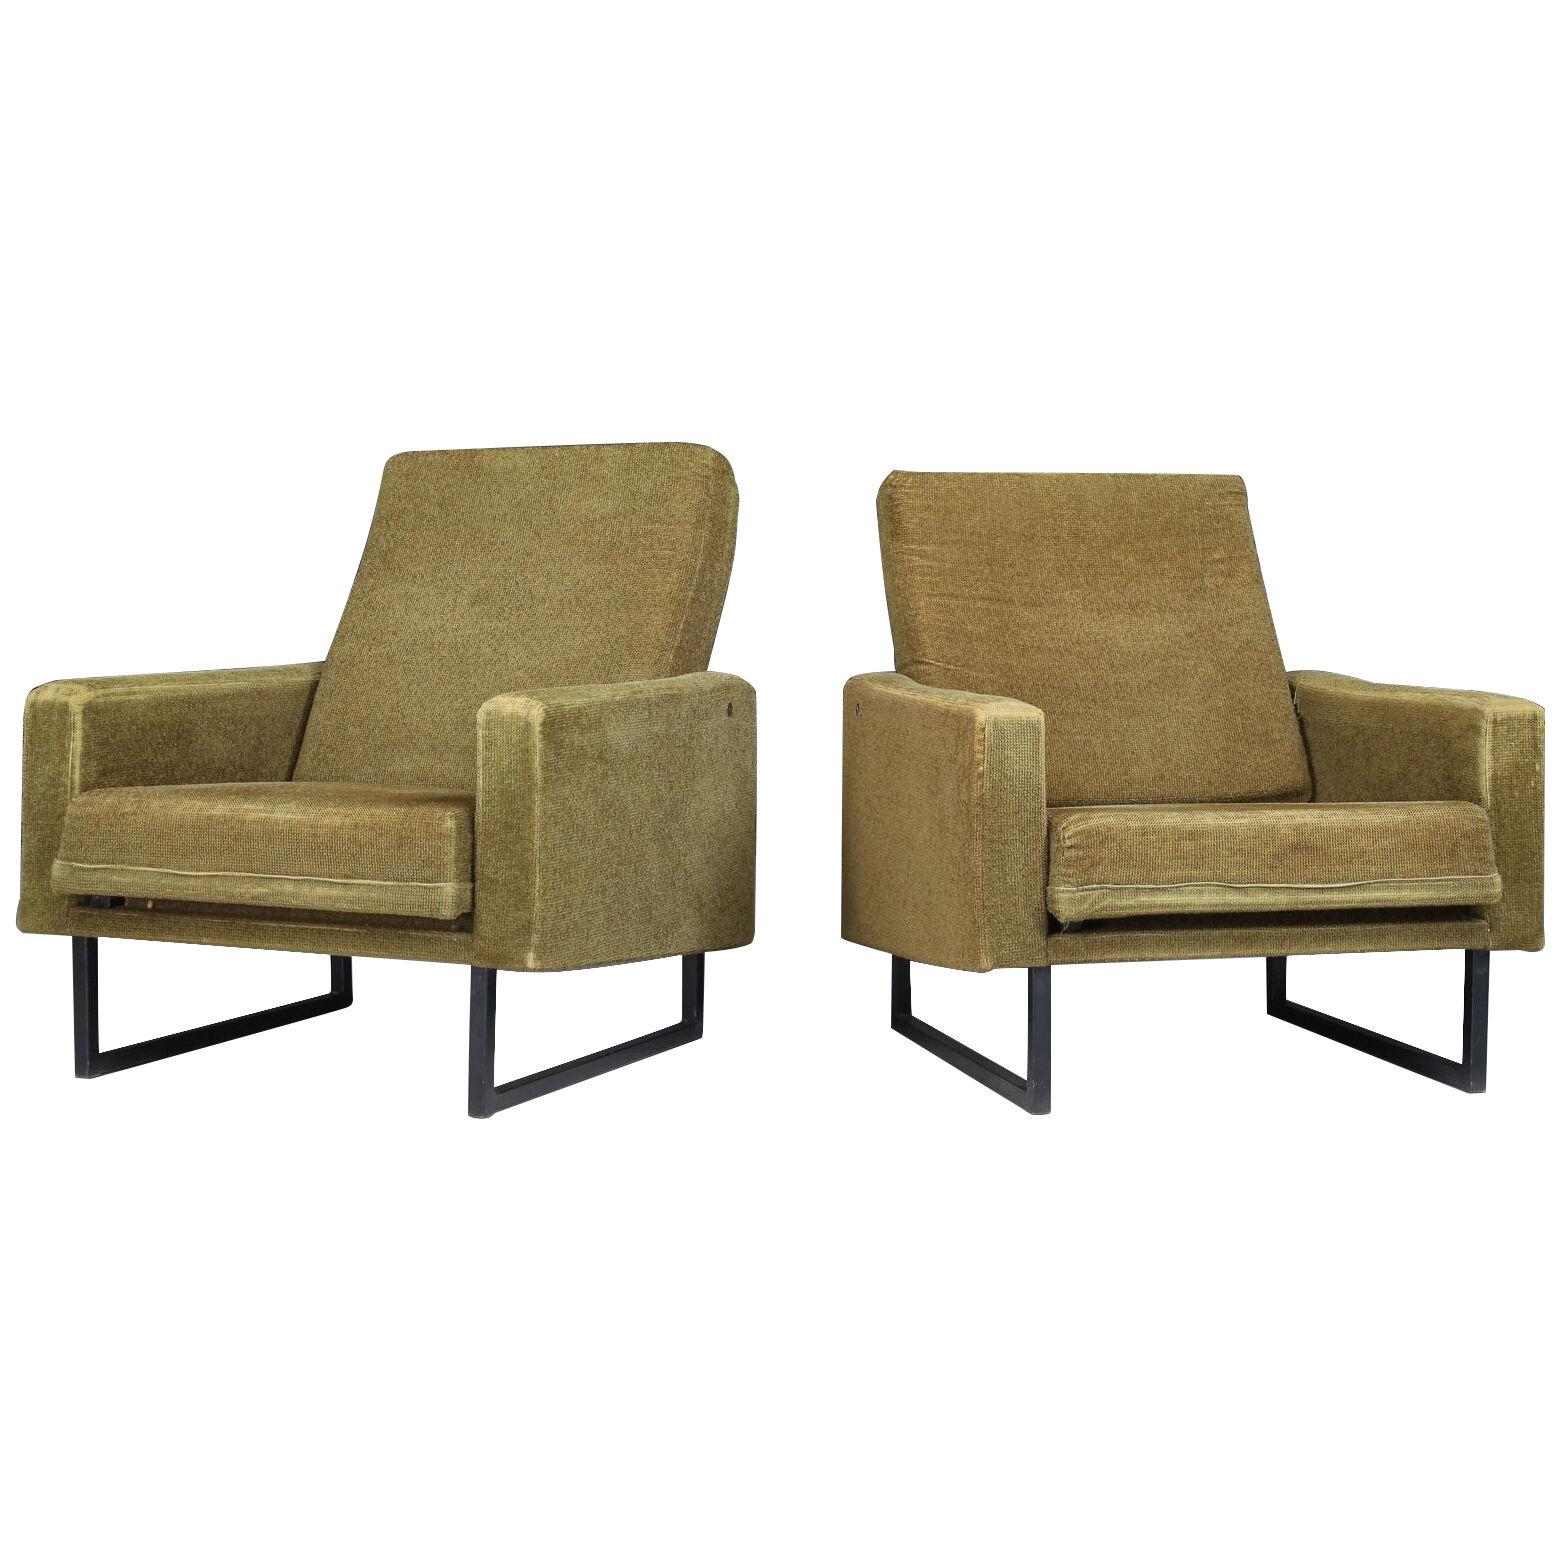 Pair Lounge Chairs by René Jean Caillette for Steiner in Original Fabric, 1963 